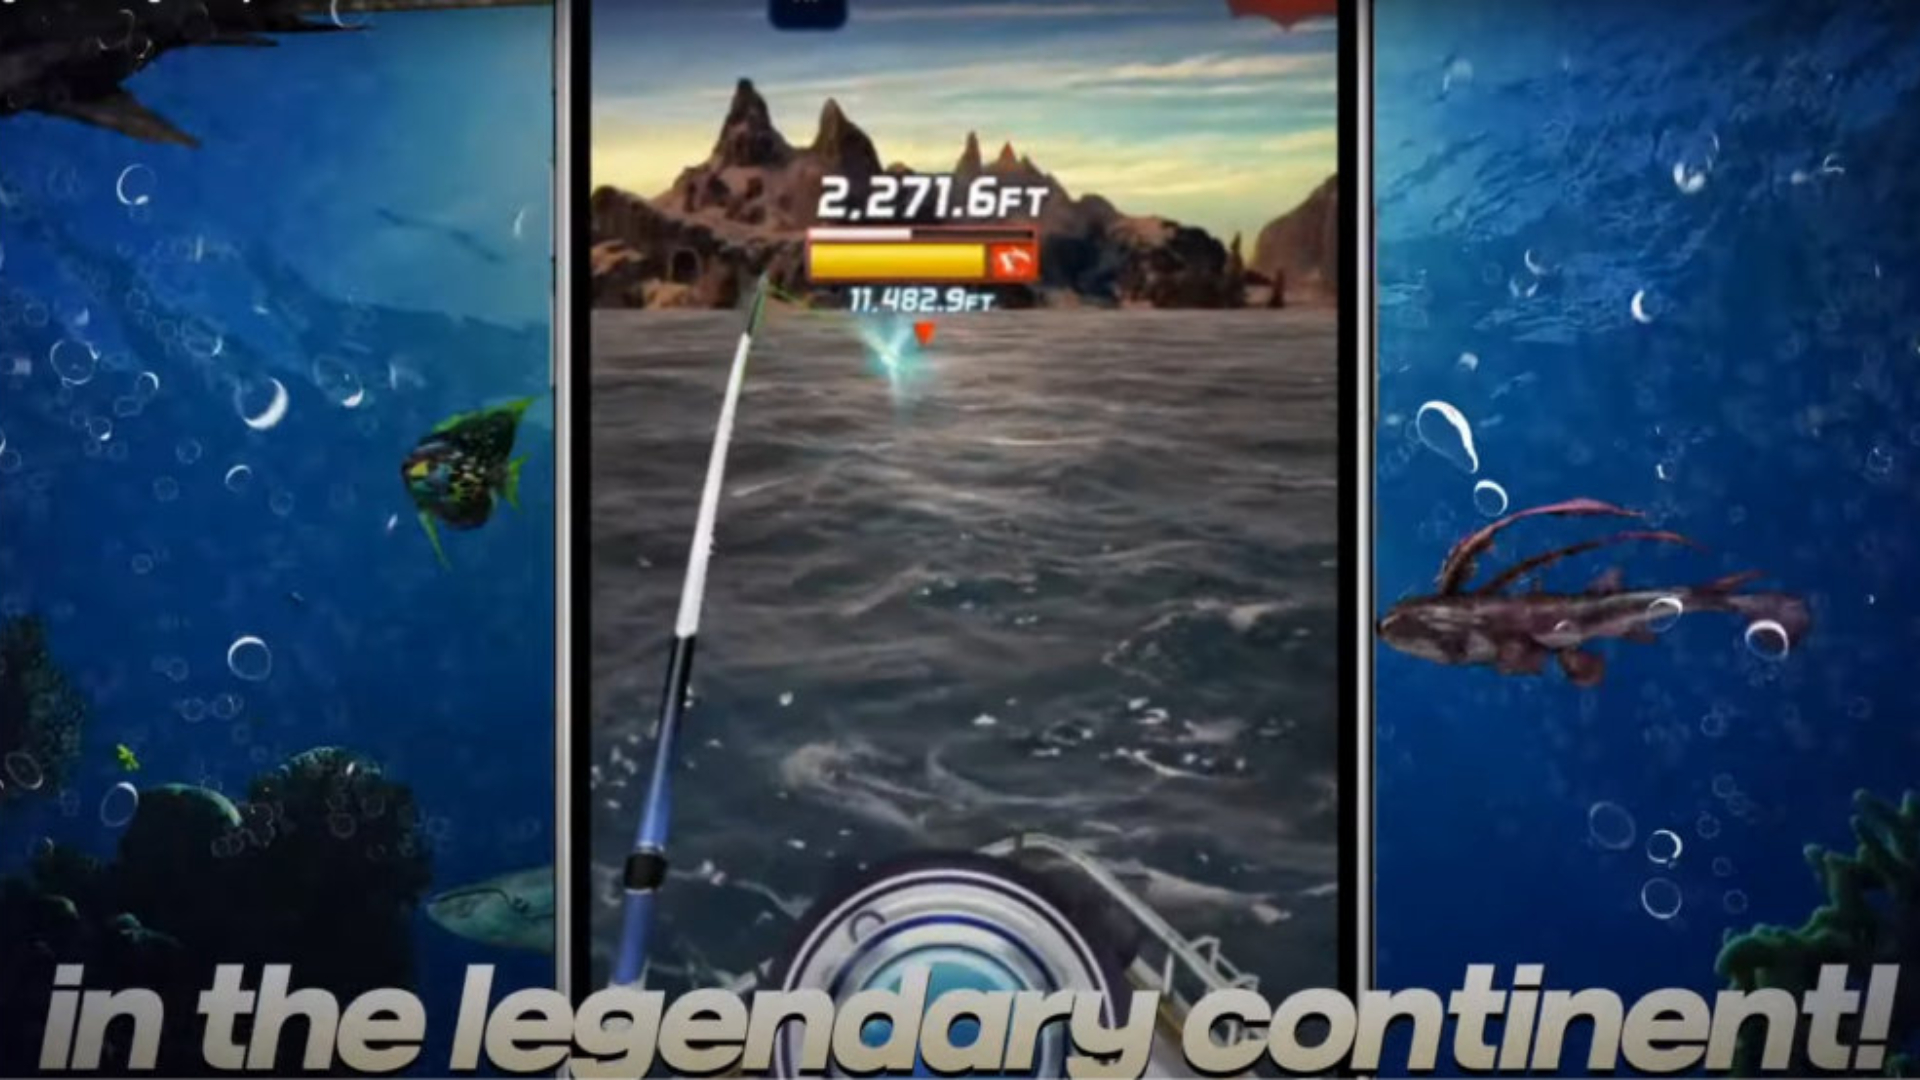 Best mobile sports games: Ace Fishing: Wild Catch. Image shows someone fishing at see, with borders showing fish under the ocean. At the bottom of the screen it says "in the legendary continent!"